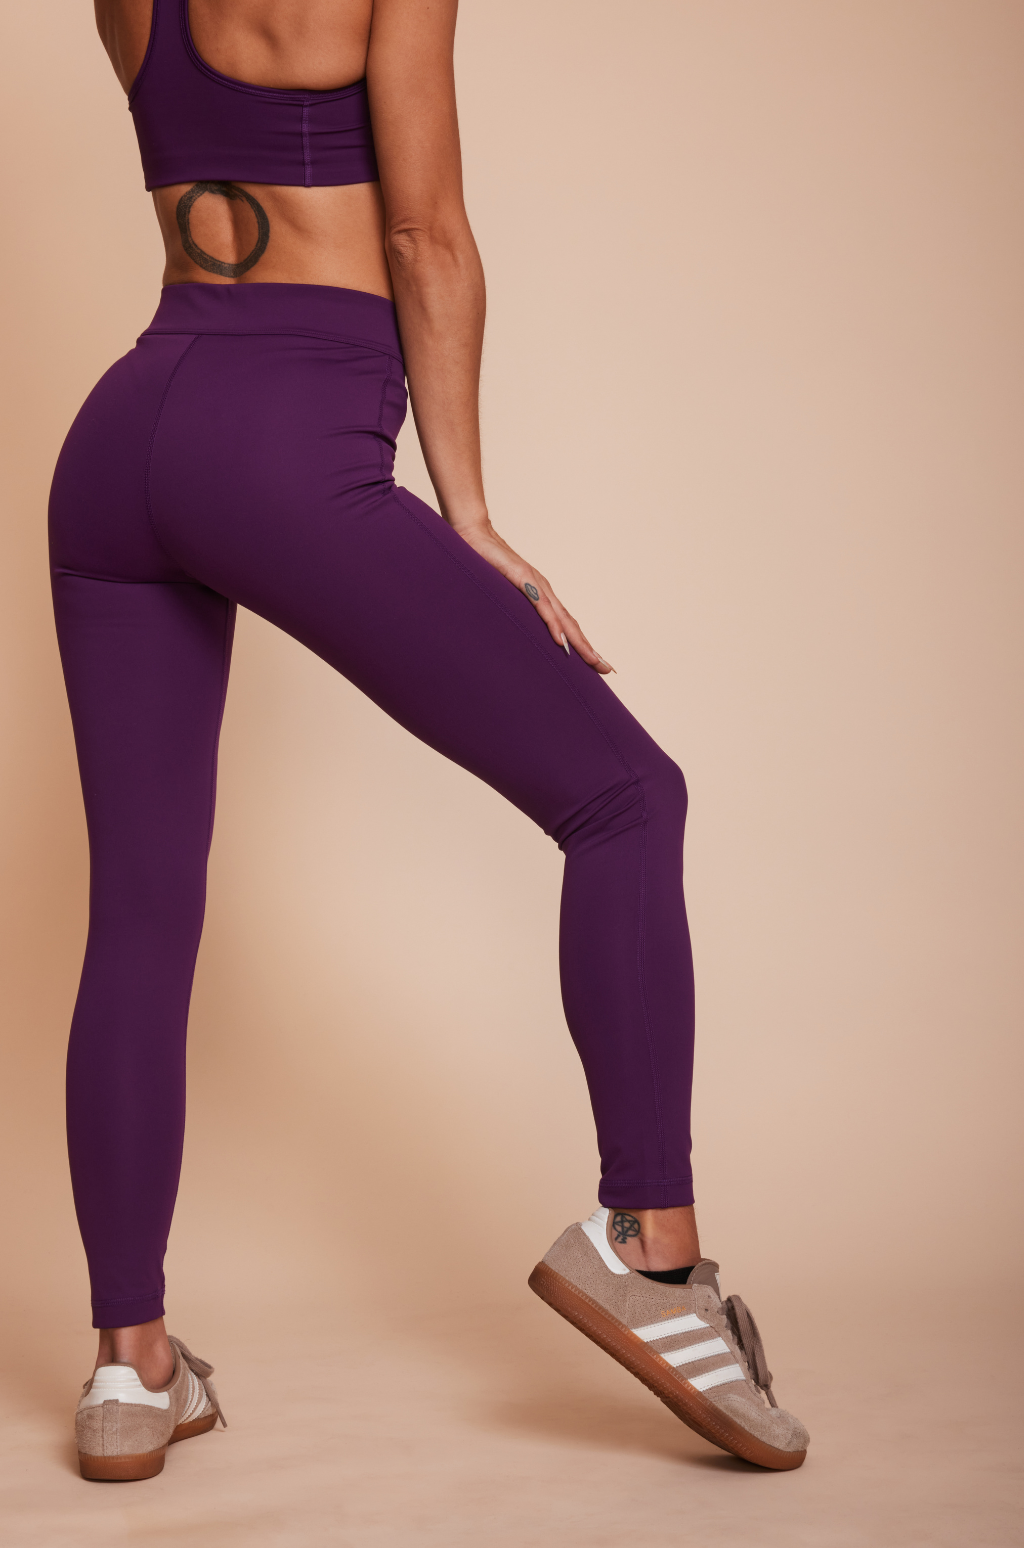 Two Colors Available Sexy Gym Breathable Active Women Yoga Legging Pants -  China Yoga Pants and Yoga Pants Legging with Pocket price